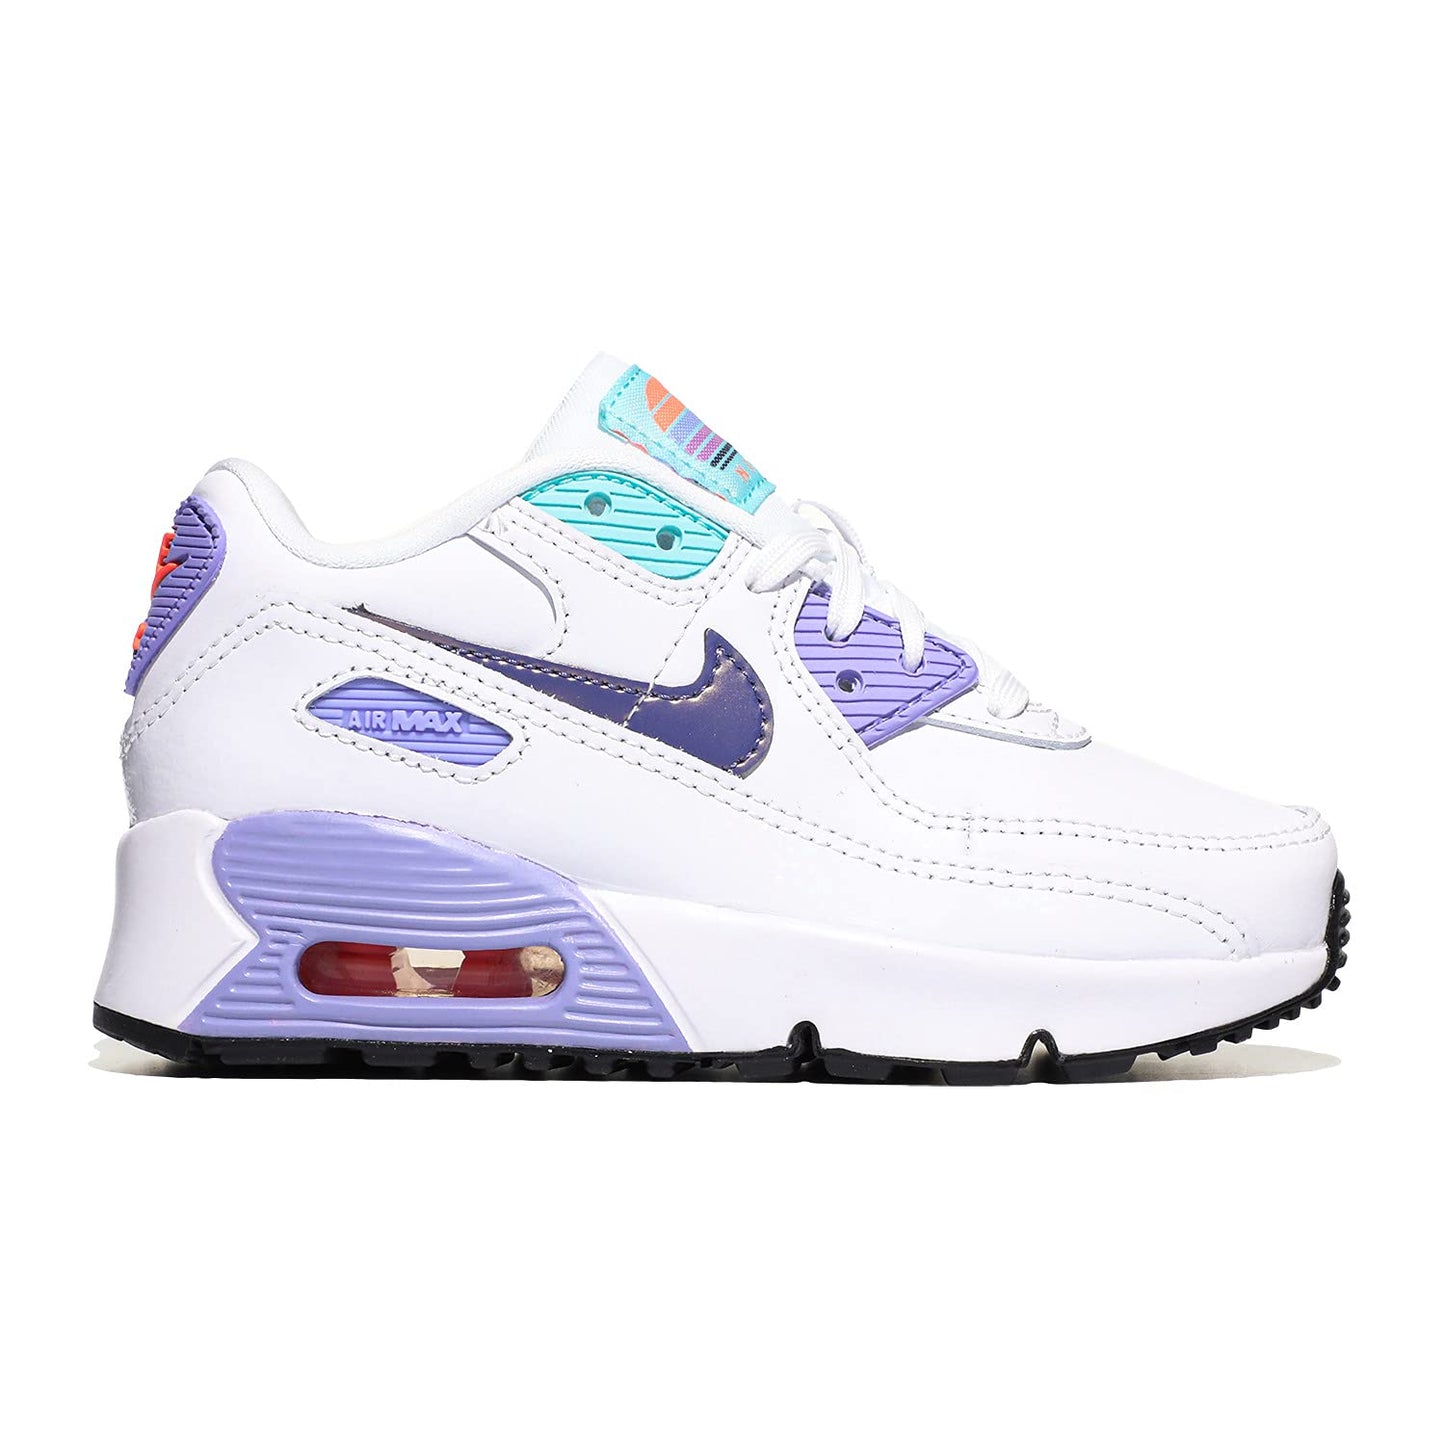 Image 5 of Air Max 90 LTR SE 2 (Little Kid)